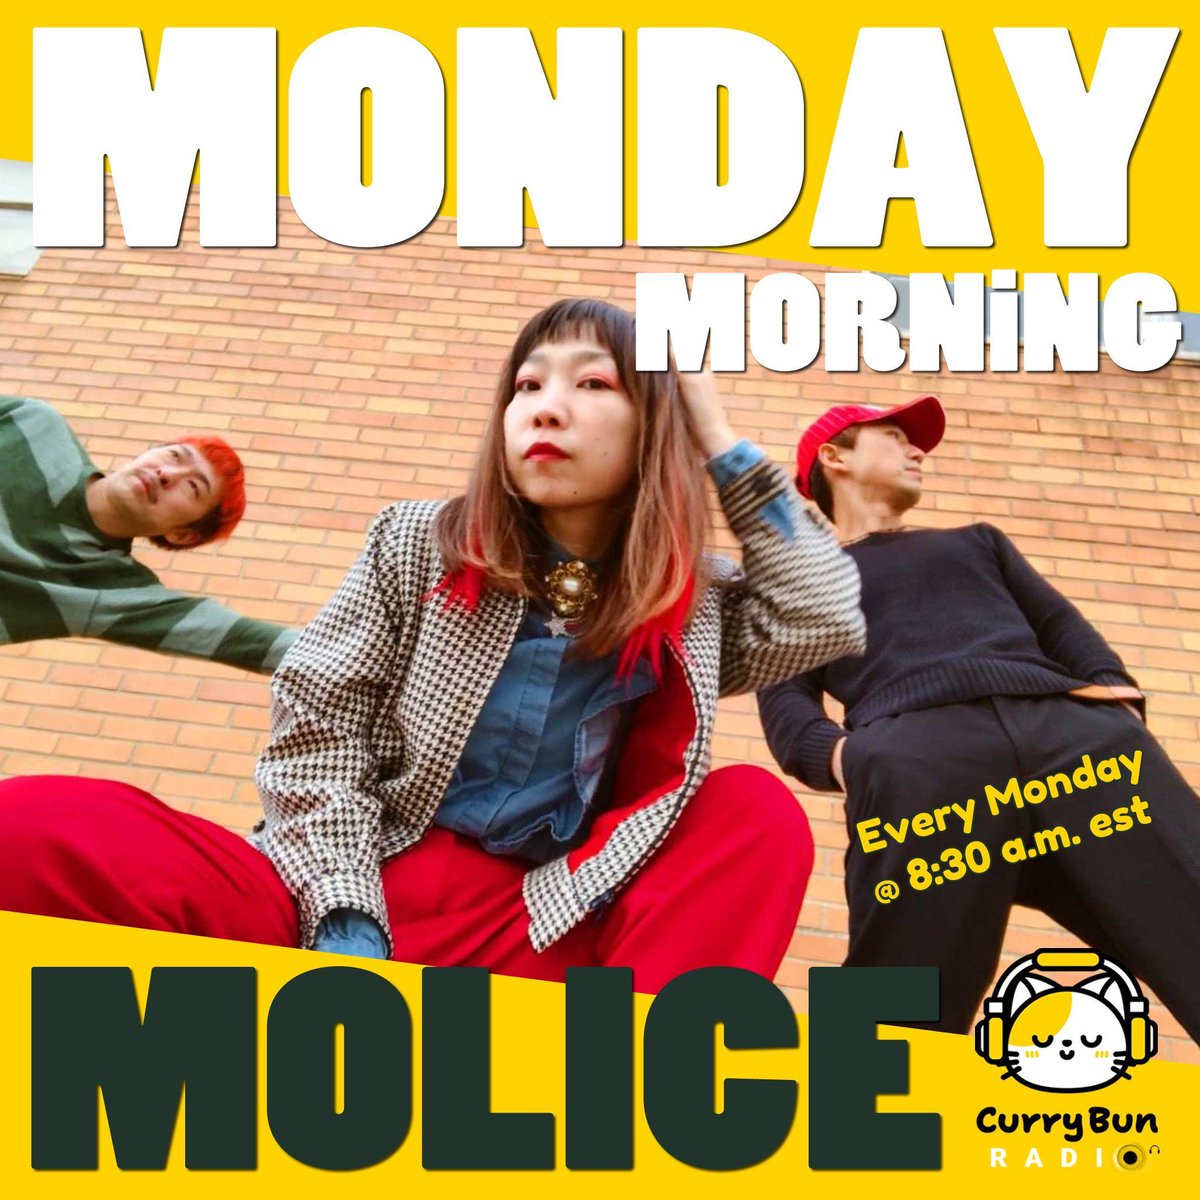 currybun.net/mmm
They're BACK baby! 
Catch the Monday Morning Molice on the flipside @ 8:30pm EST
Every Monday's @ 8:30 & 20:30 EST -22:30 & Tue. 10:30 JST
#themolice #Japanese #rock #dancecore #postpunk #feakenawesome on #currybunradio